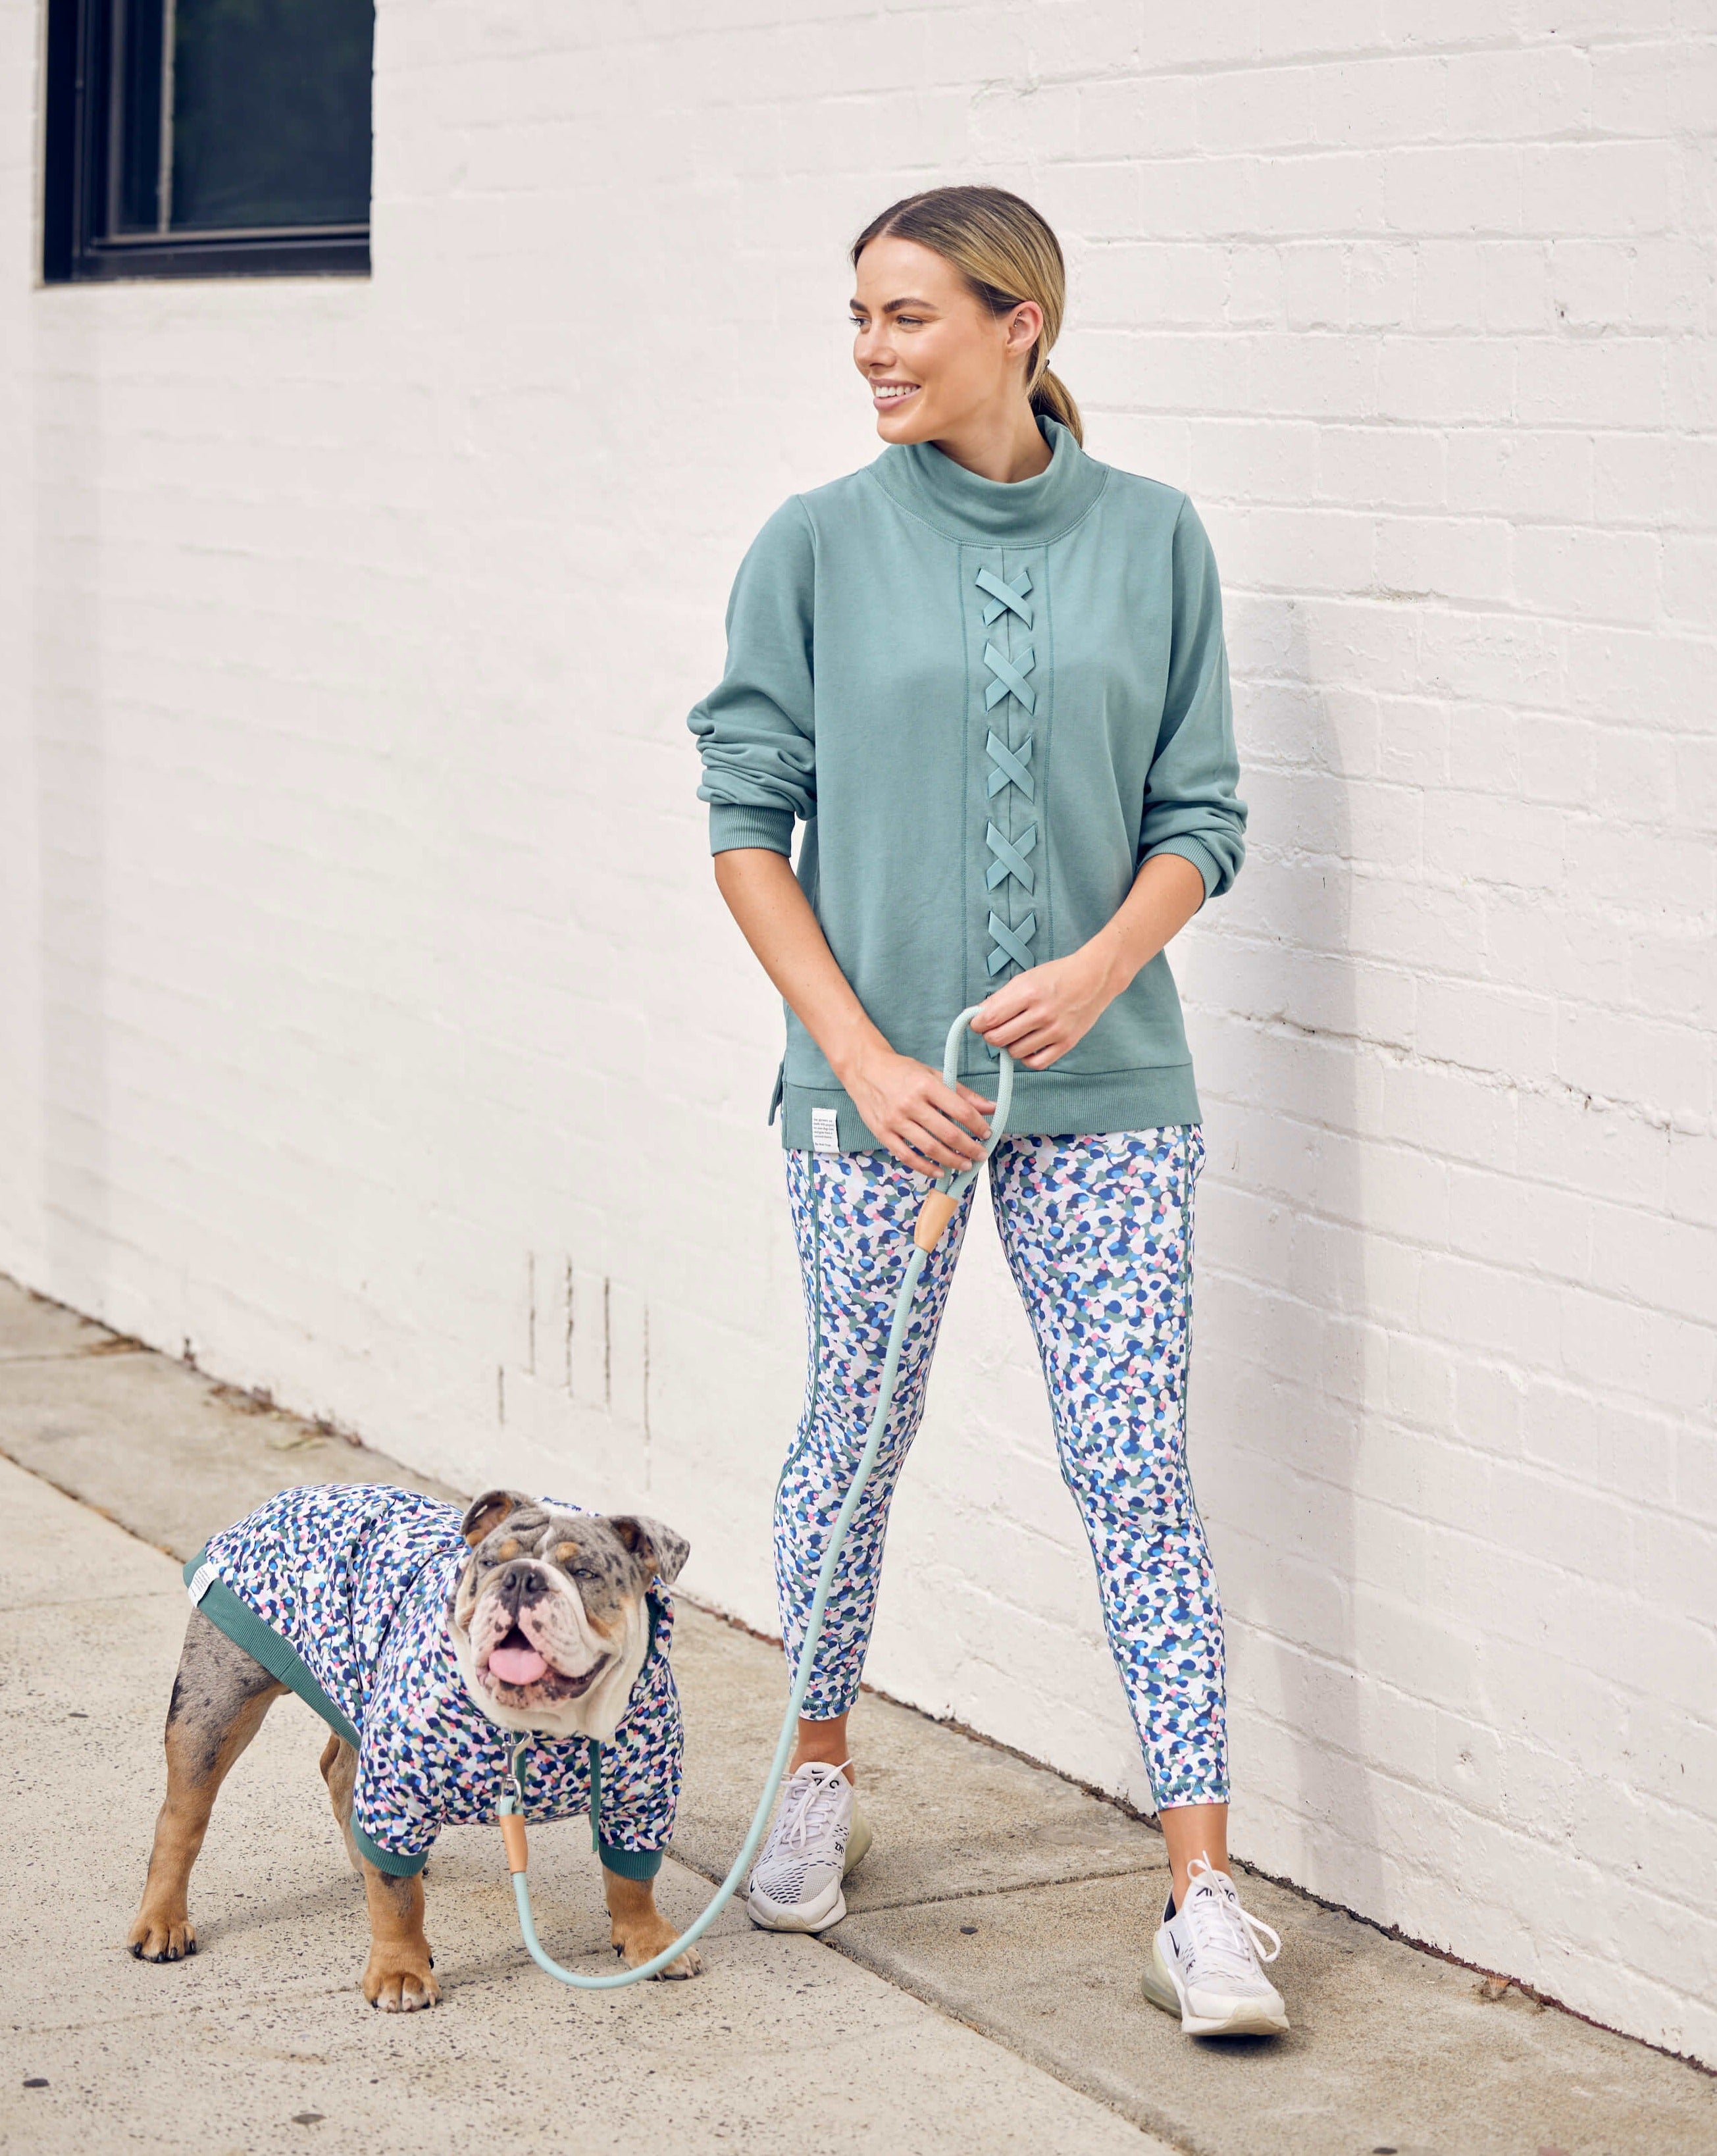 A lady walking her Bulldog wearing matching Darren and Phillip dog hoodie and leggings.